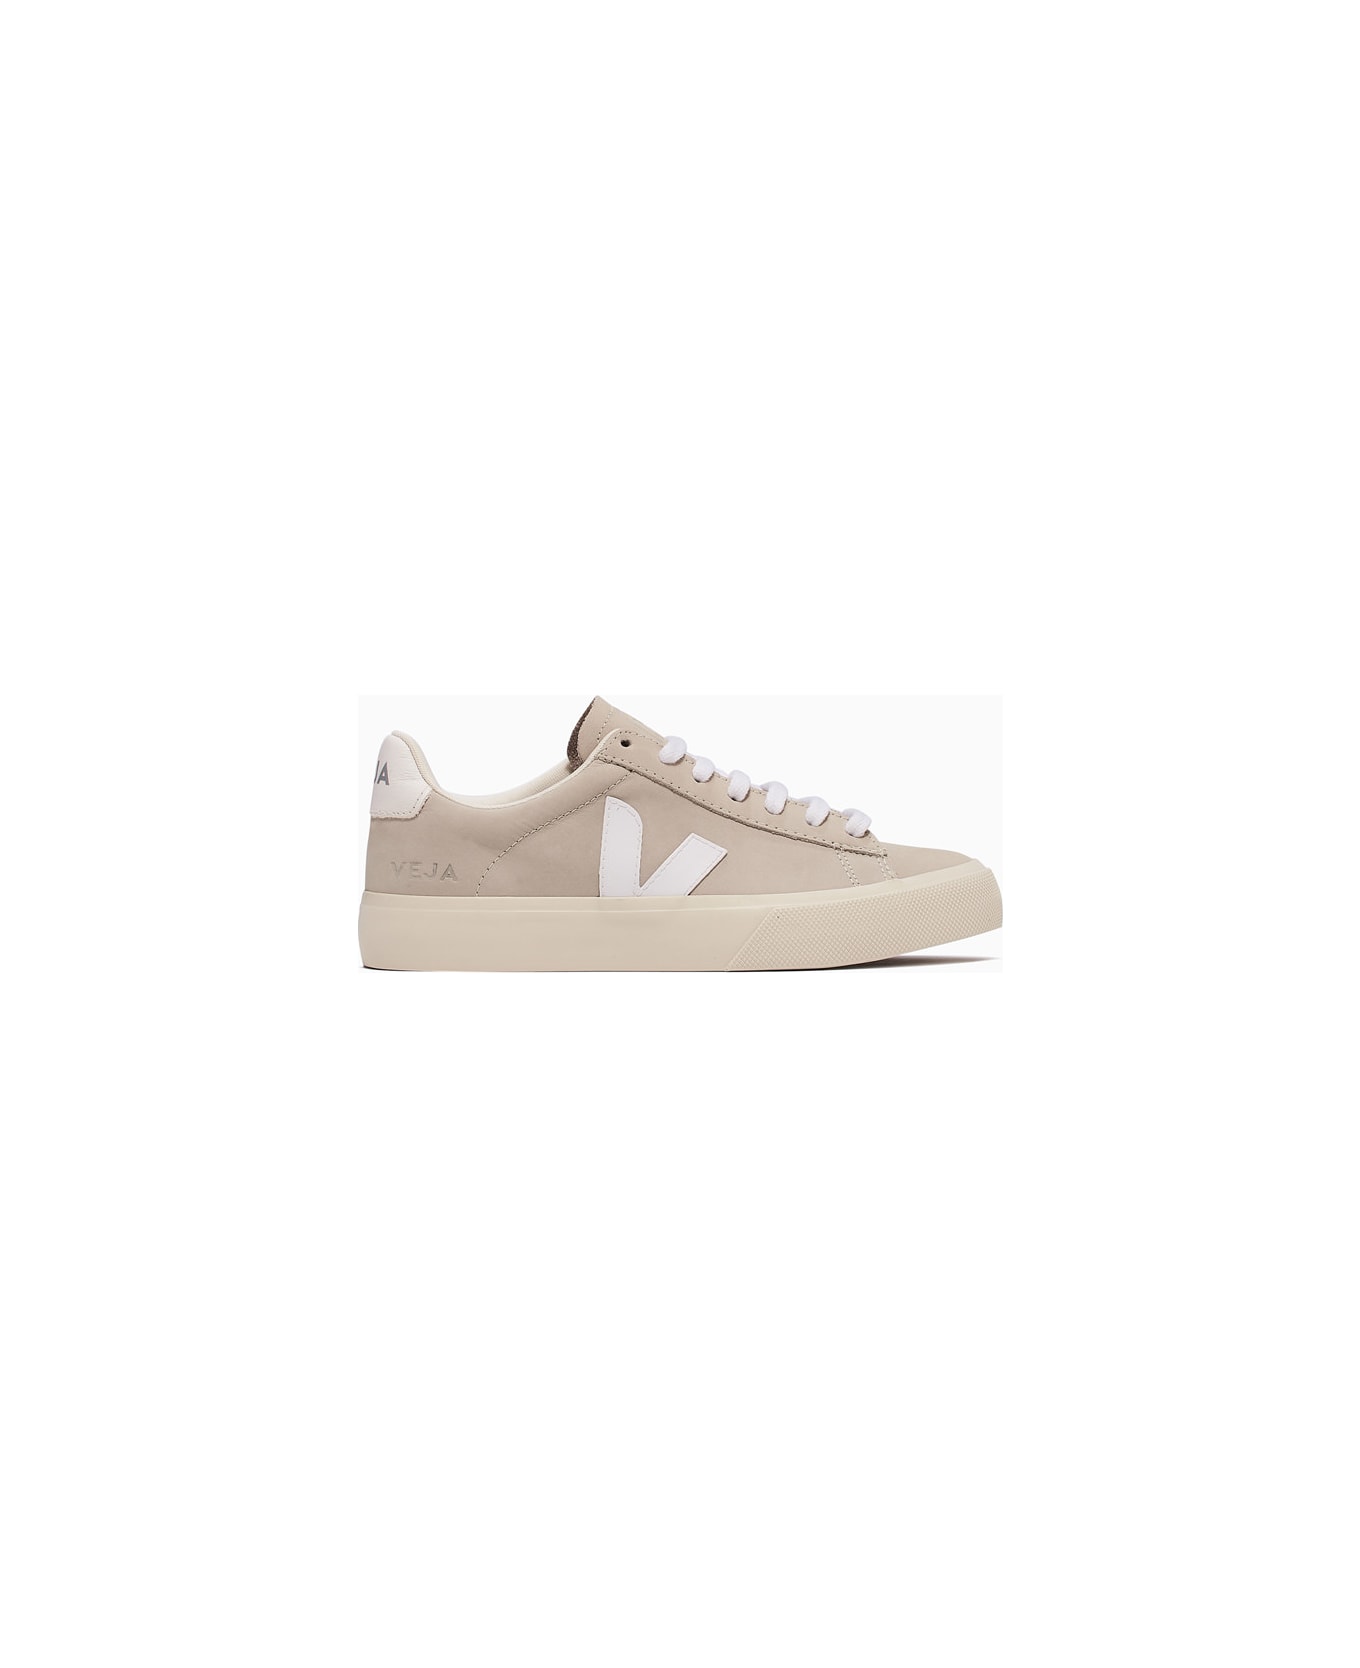 Veja Campo Sneakers Cp0502485 - White Matcha